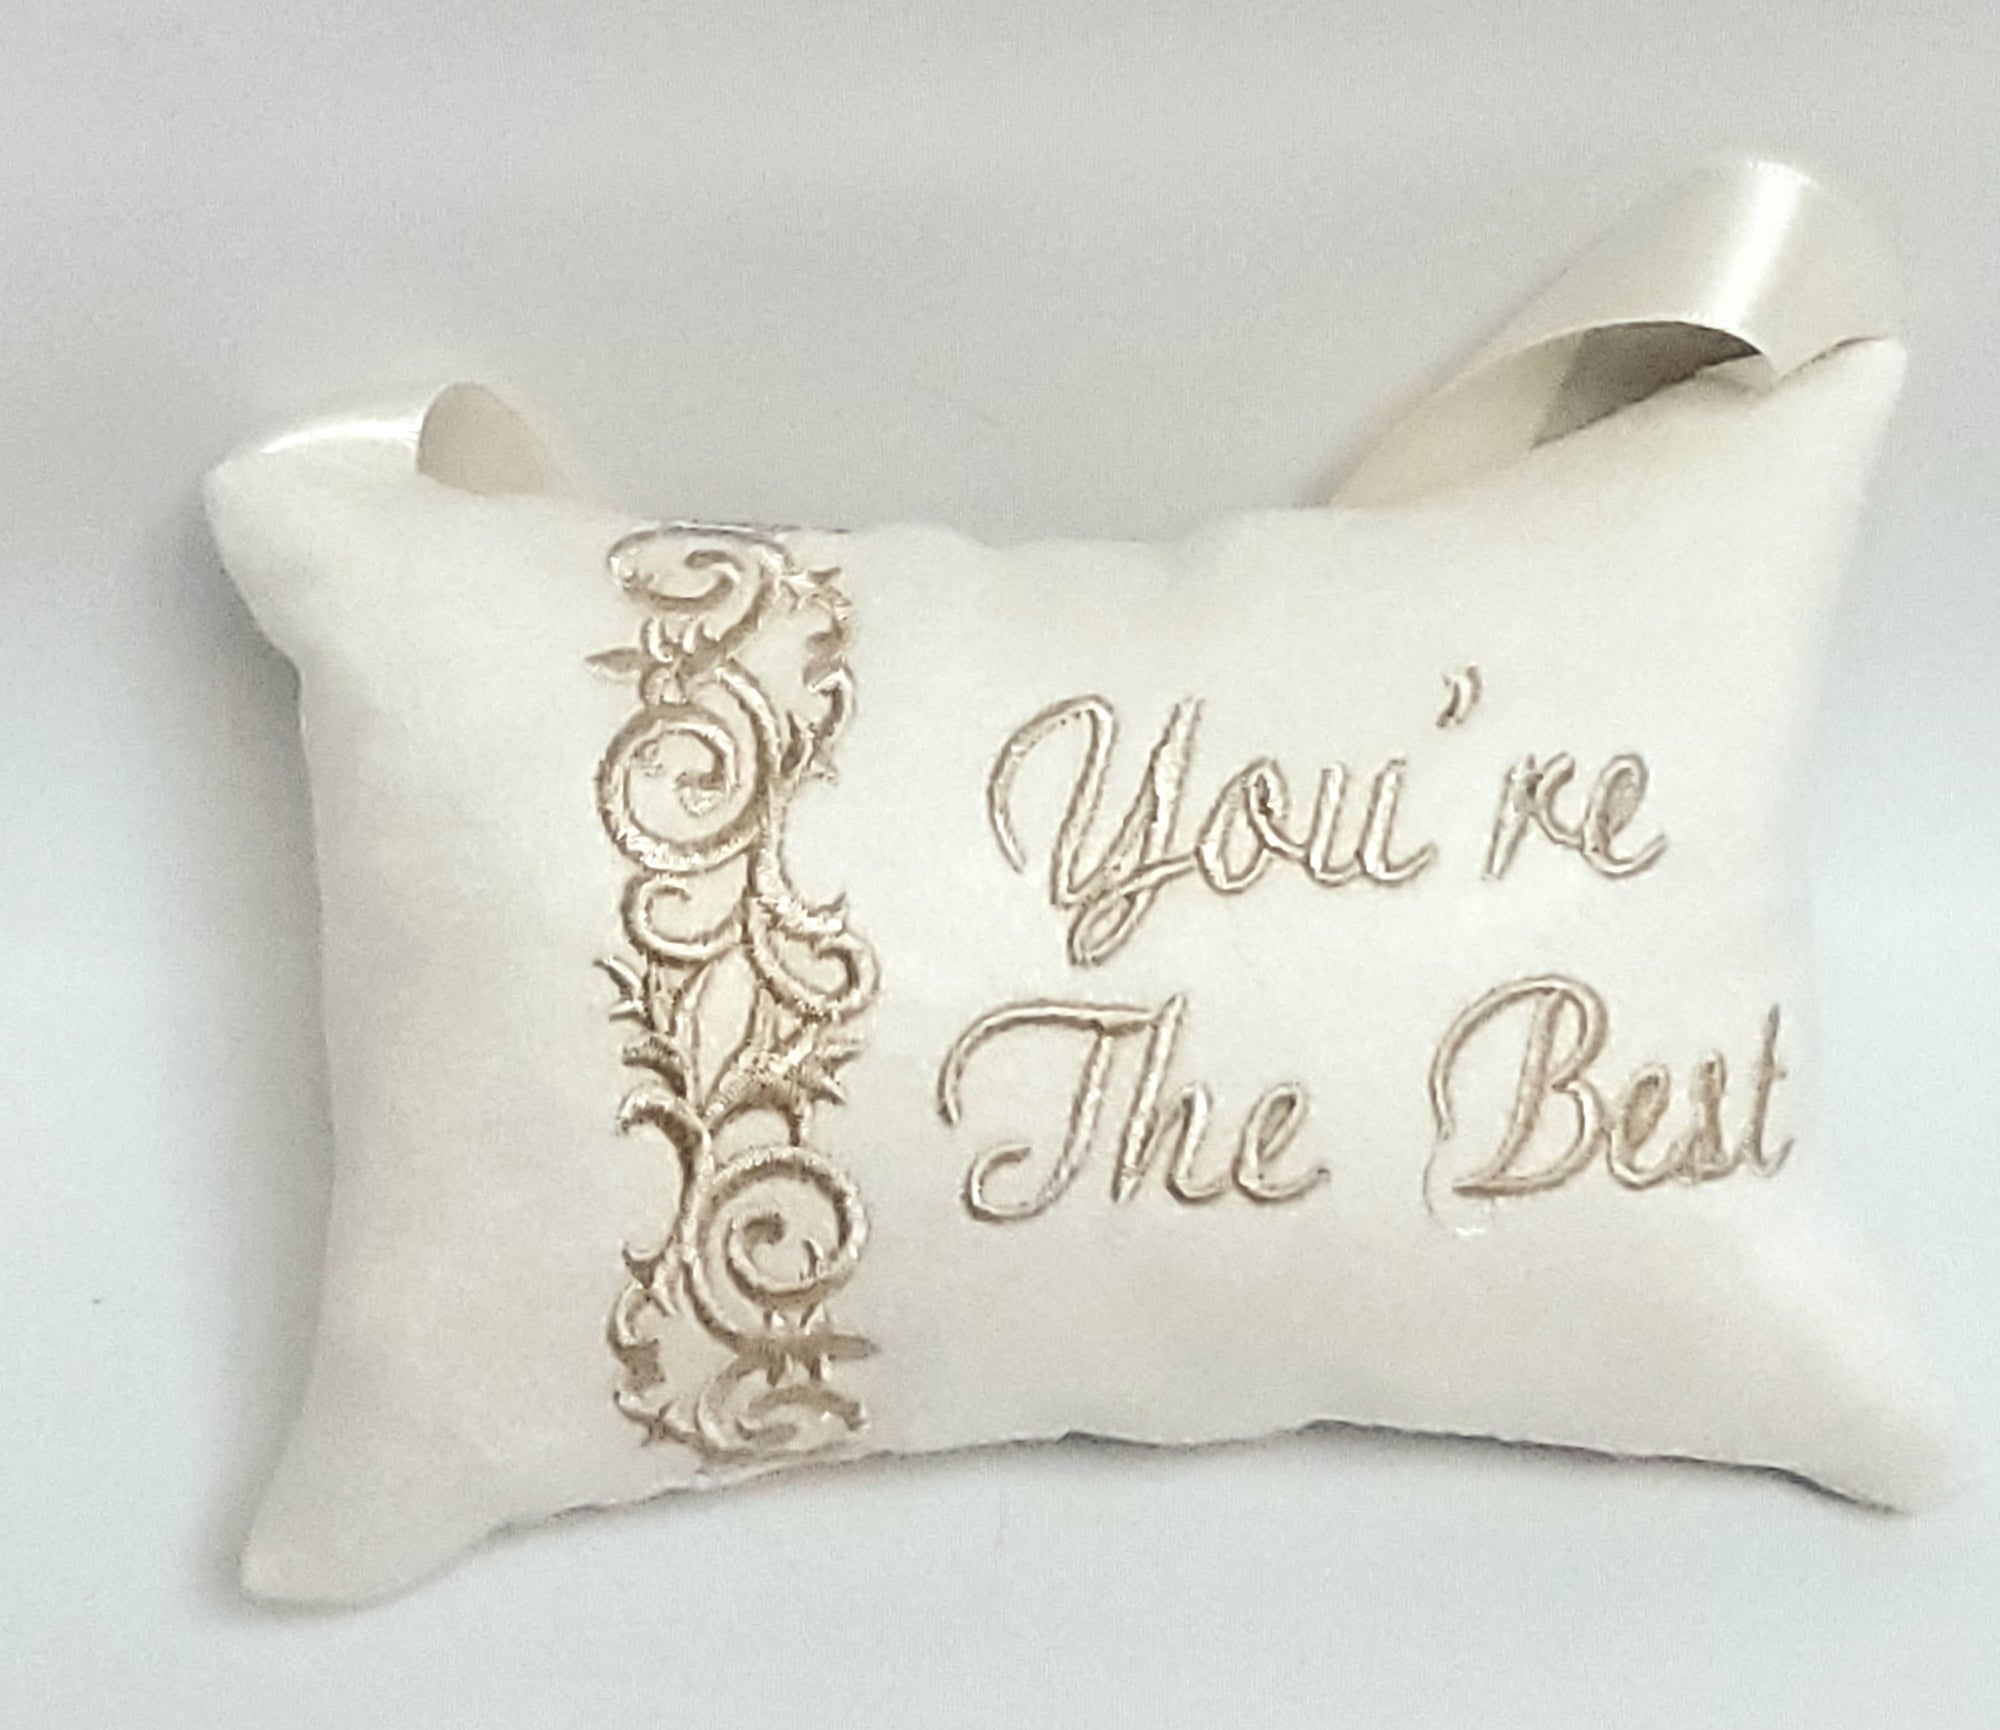 "You're The Best" Pillow